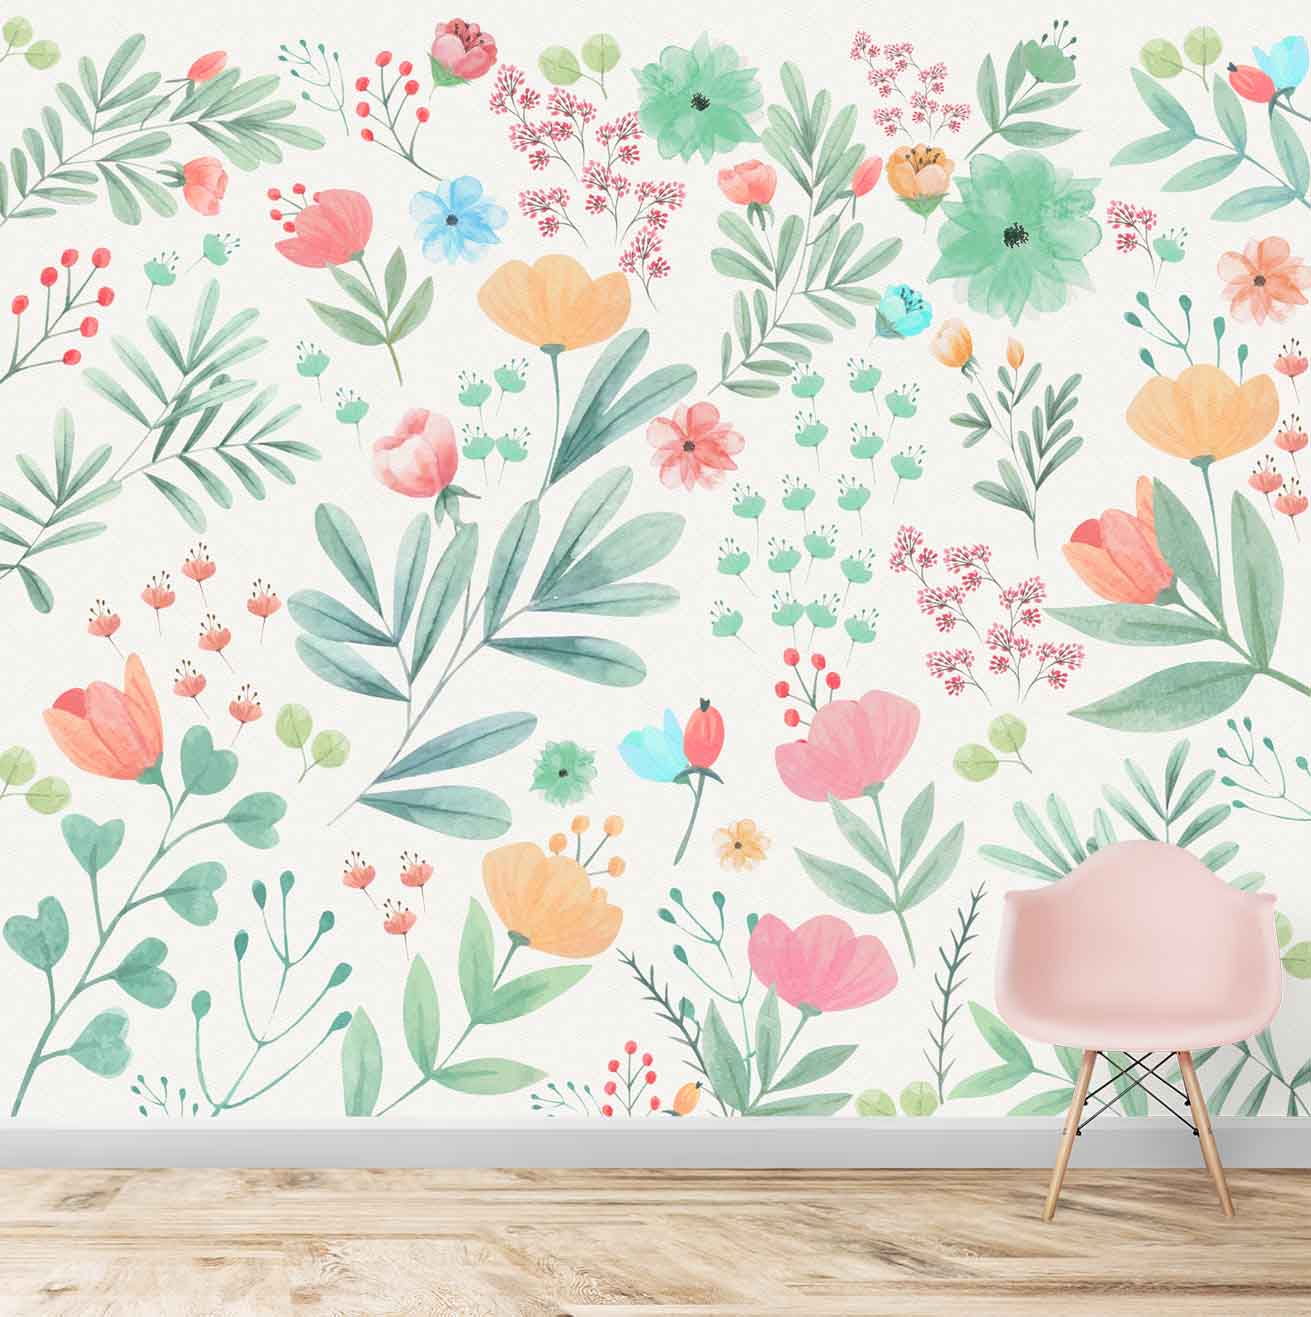 Water Painted Floral Design, Wall Mural for Kids Room